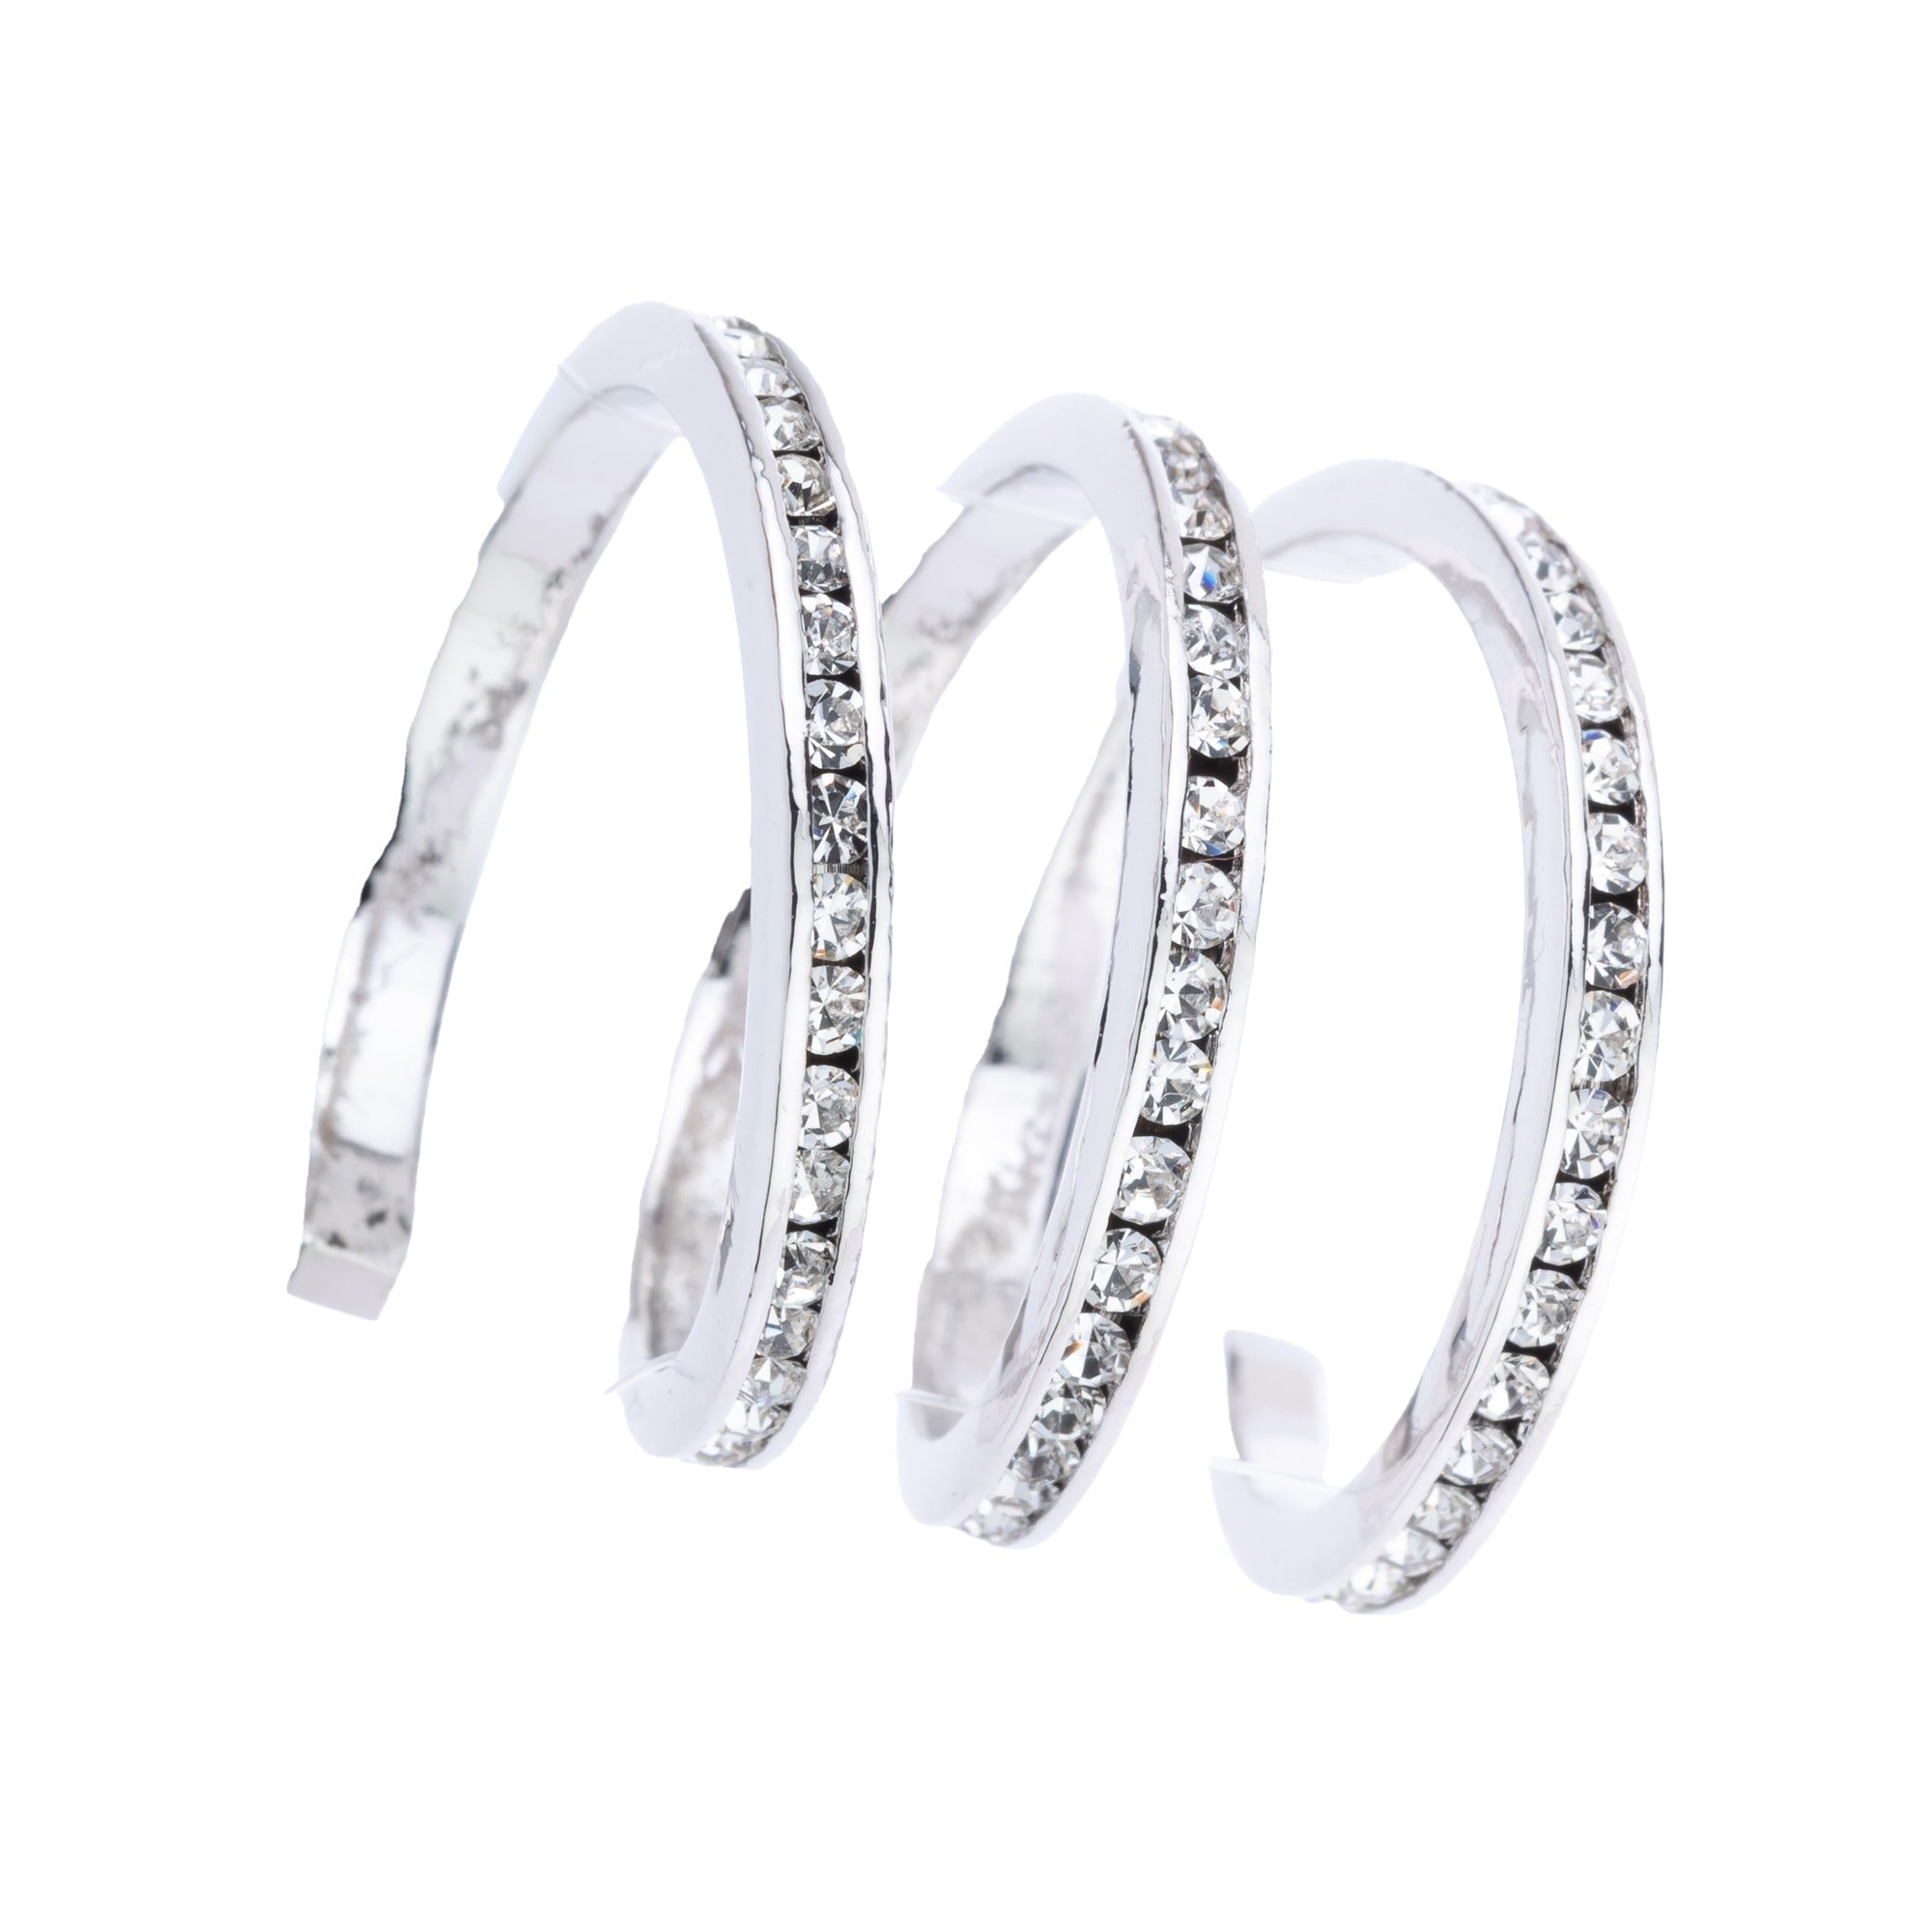 Designer Spiral Clear Crystal Fine Silver Plated Ring